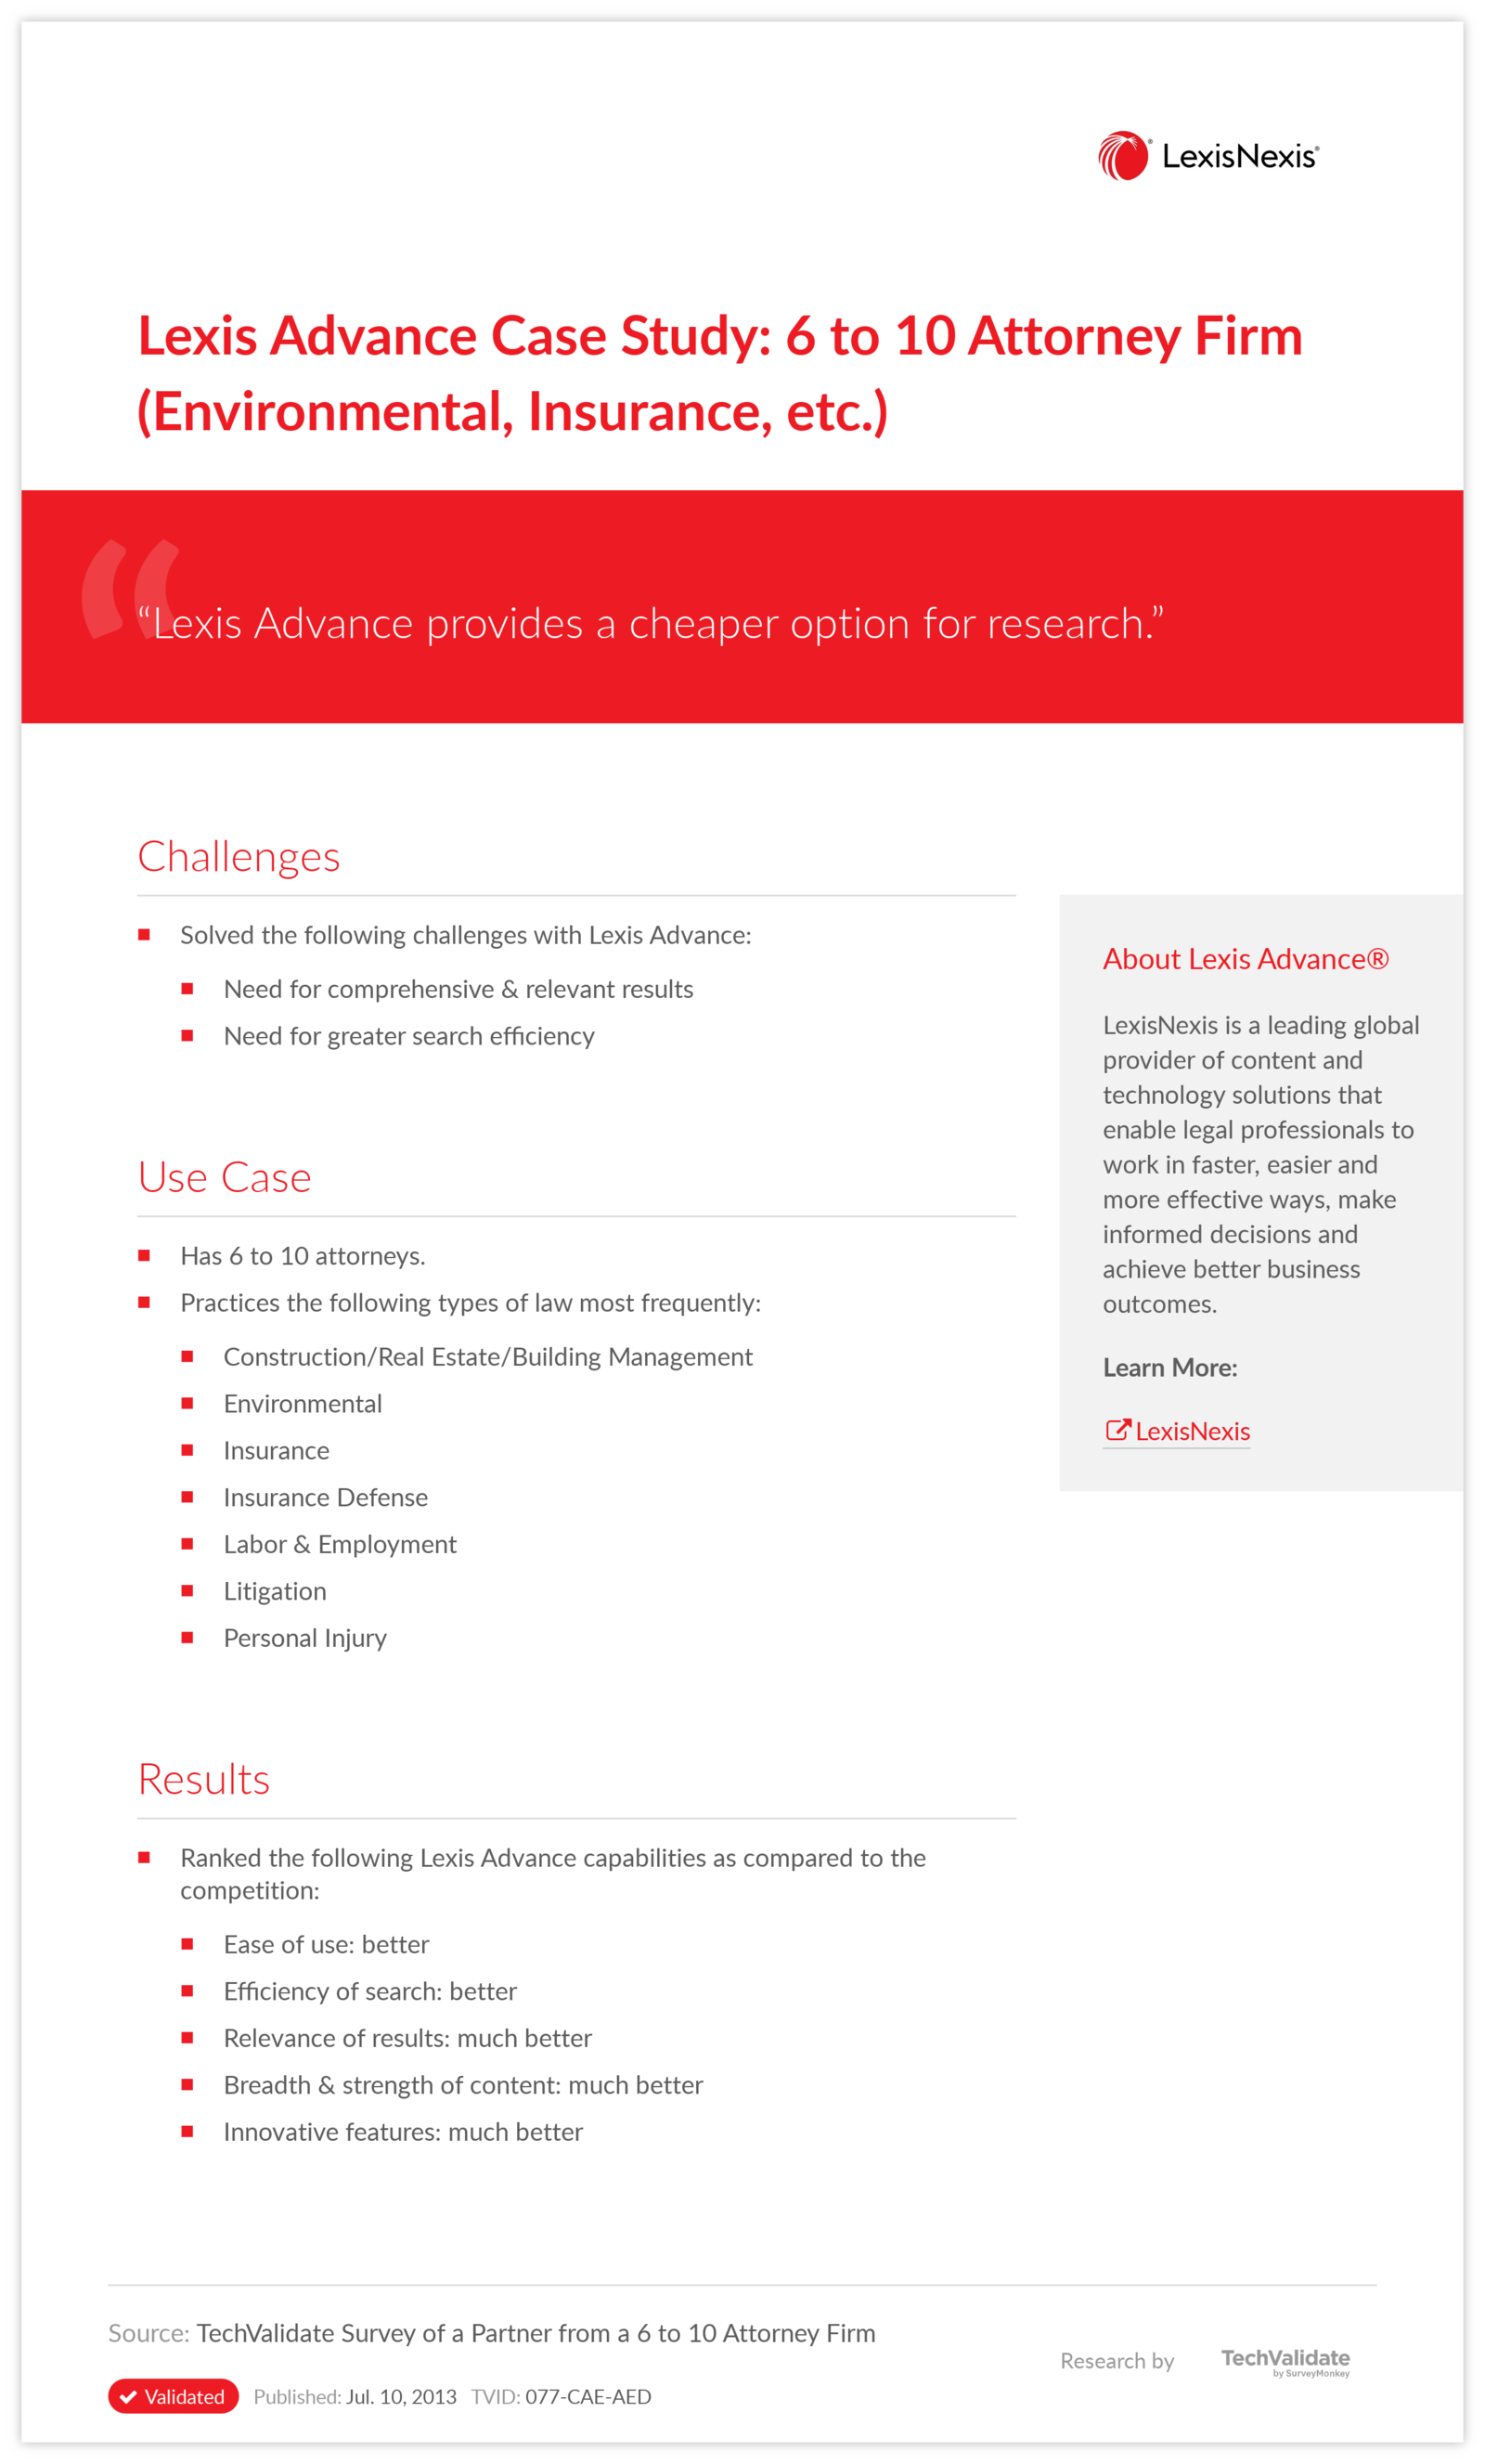 Lexis Advance Case Study: 6 to 10 Attorney Firm (Environmental, Insurance, etc.)